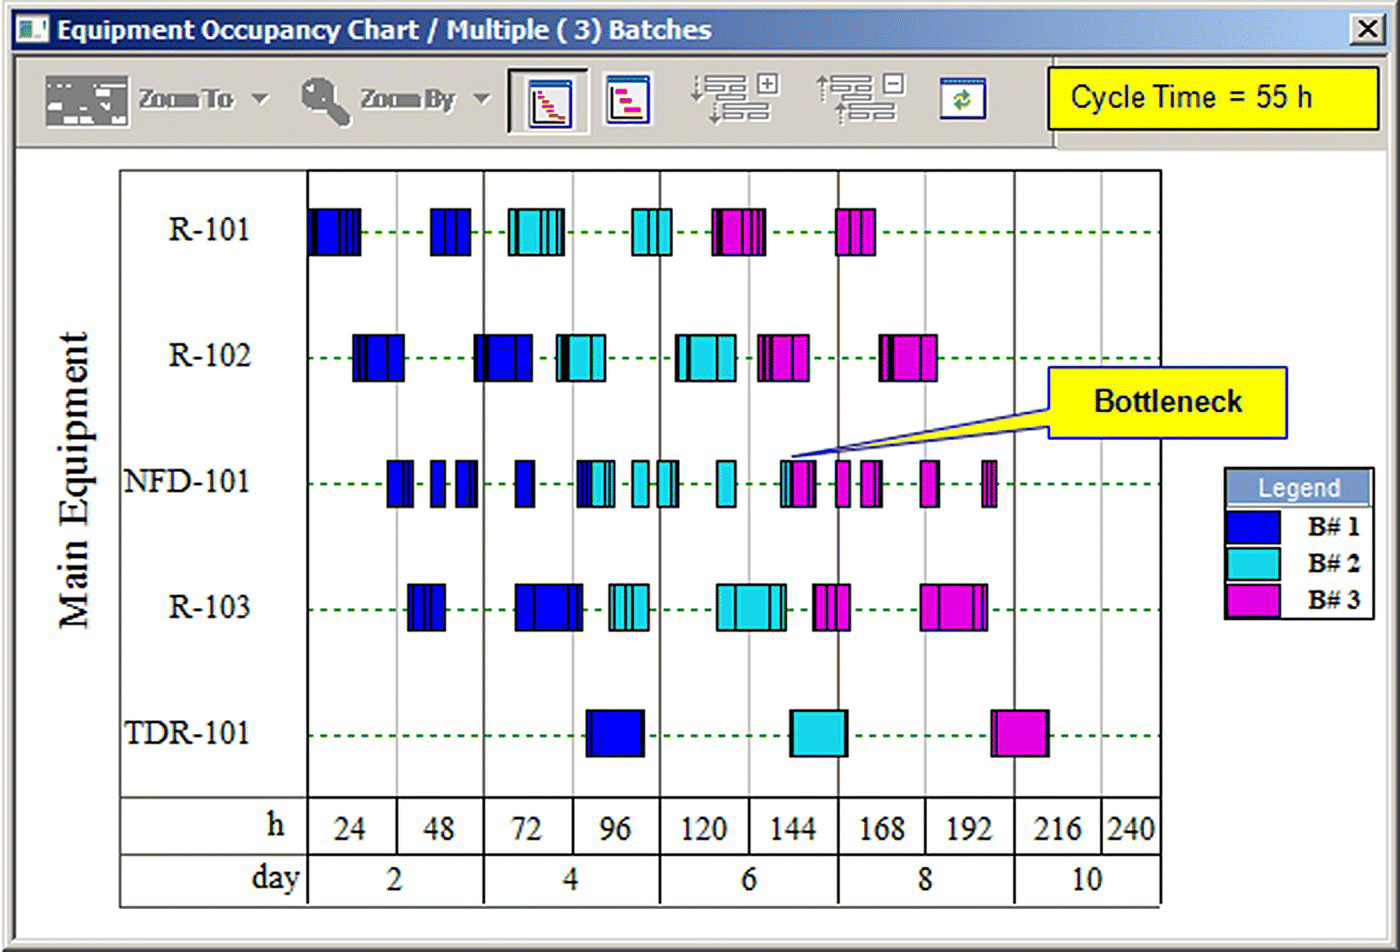 Equipment Occupancy Chart/Multiple (3) batches window with a graph for main equipment, depicting shaded boxes under R-101, R-102, NFD-101, R-103, and TDR-101 and representing for B#1, B#2, and B#3. Bottleneck is indicated.